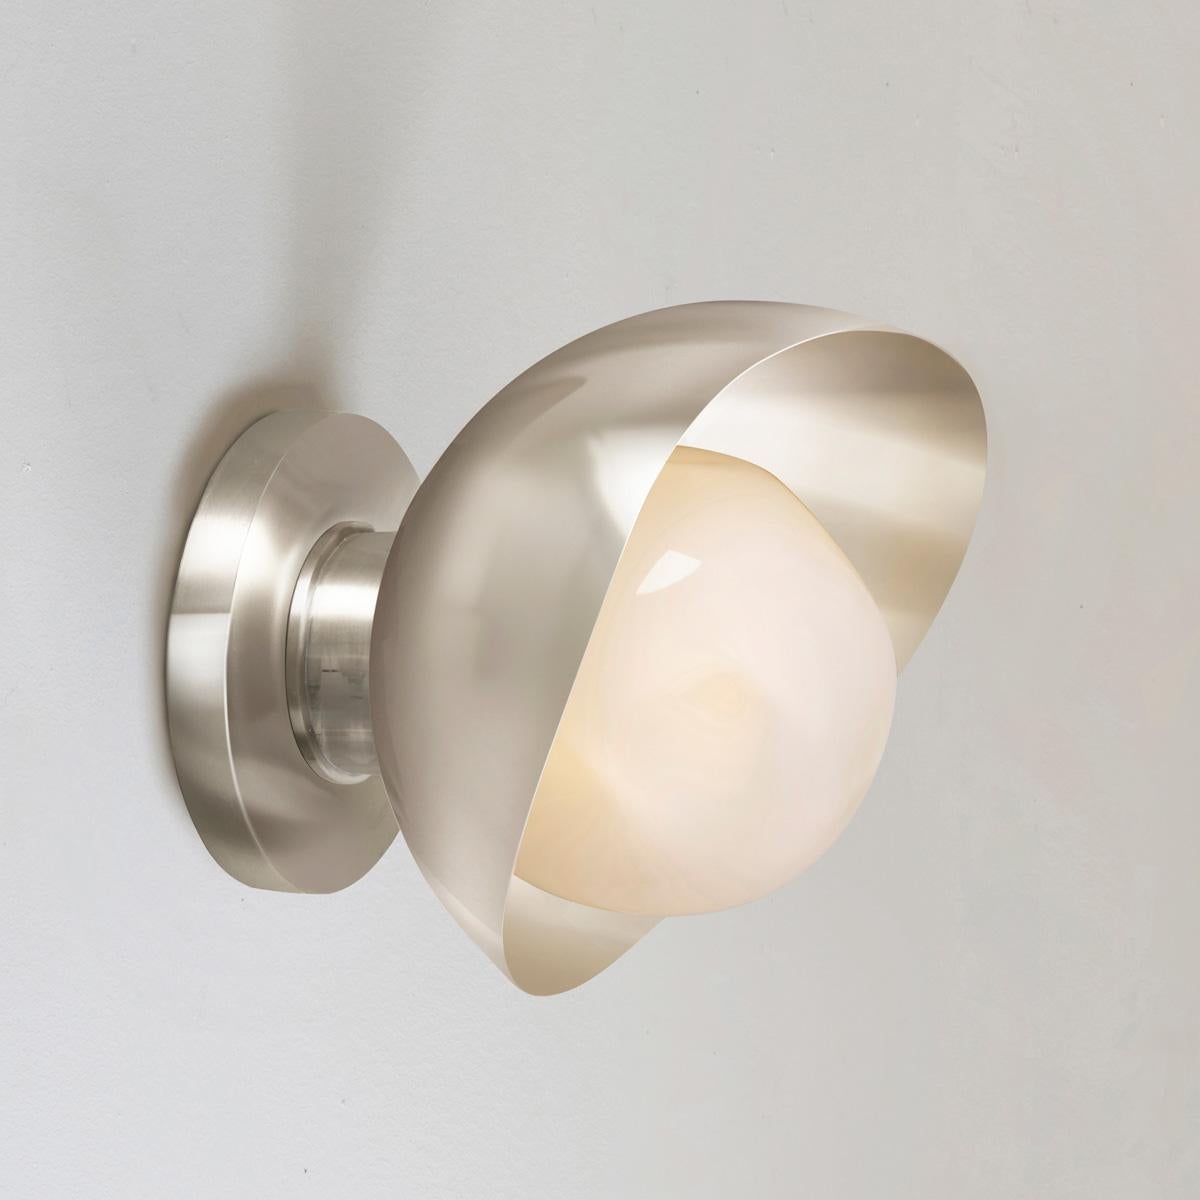 The Perla Mini wall light is the smallest member of the Perla collection featuring an organic brass shell nestling our Sfera glass handblown in Murano. See the Perla and Perla Grande for larger models.

The primary images show it in polished/satin